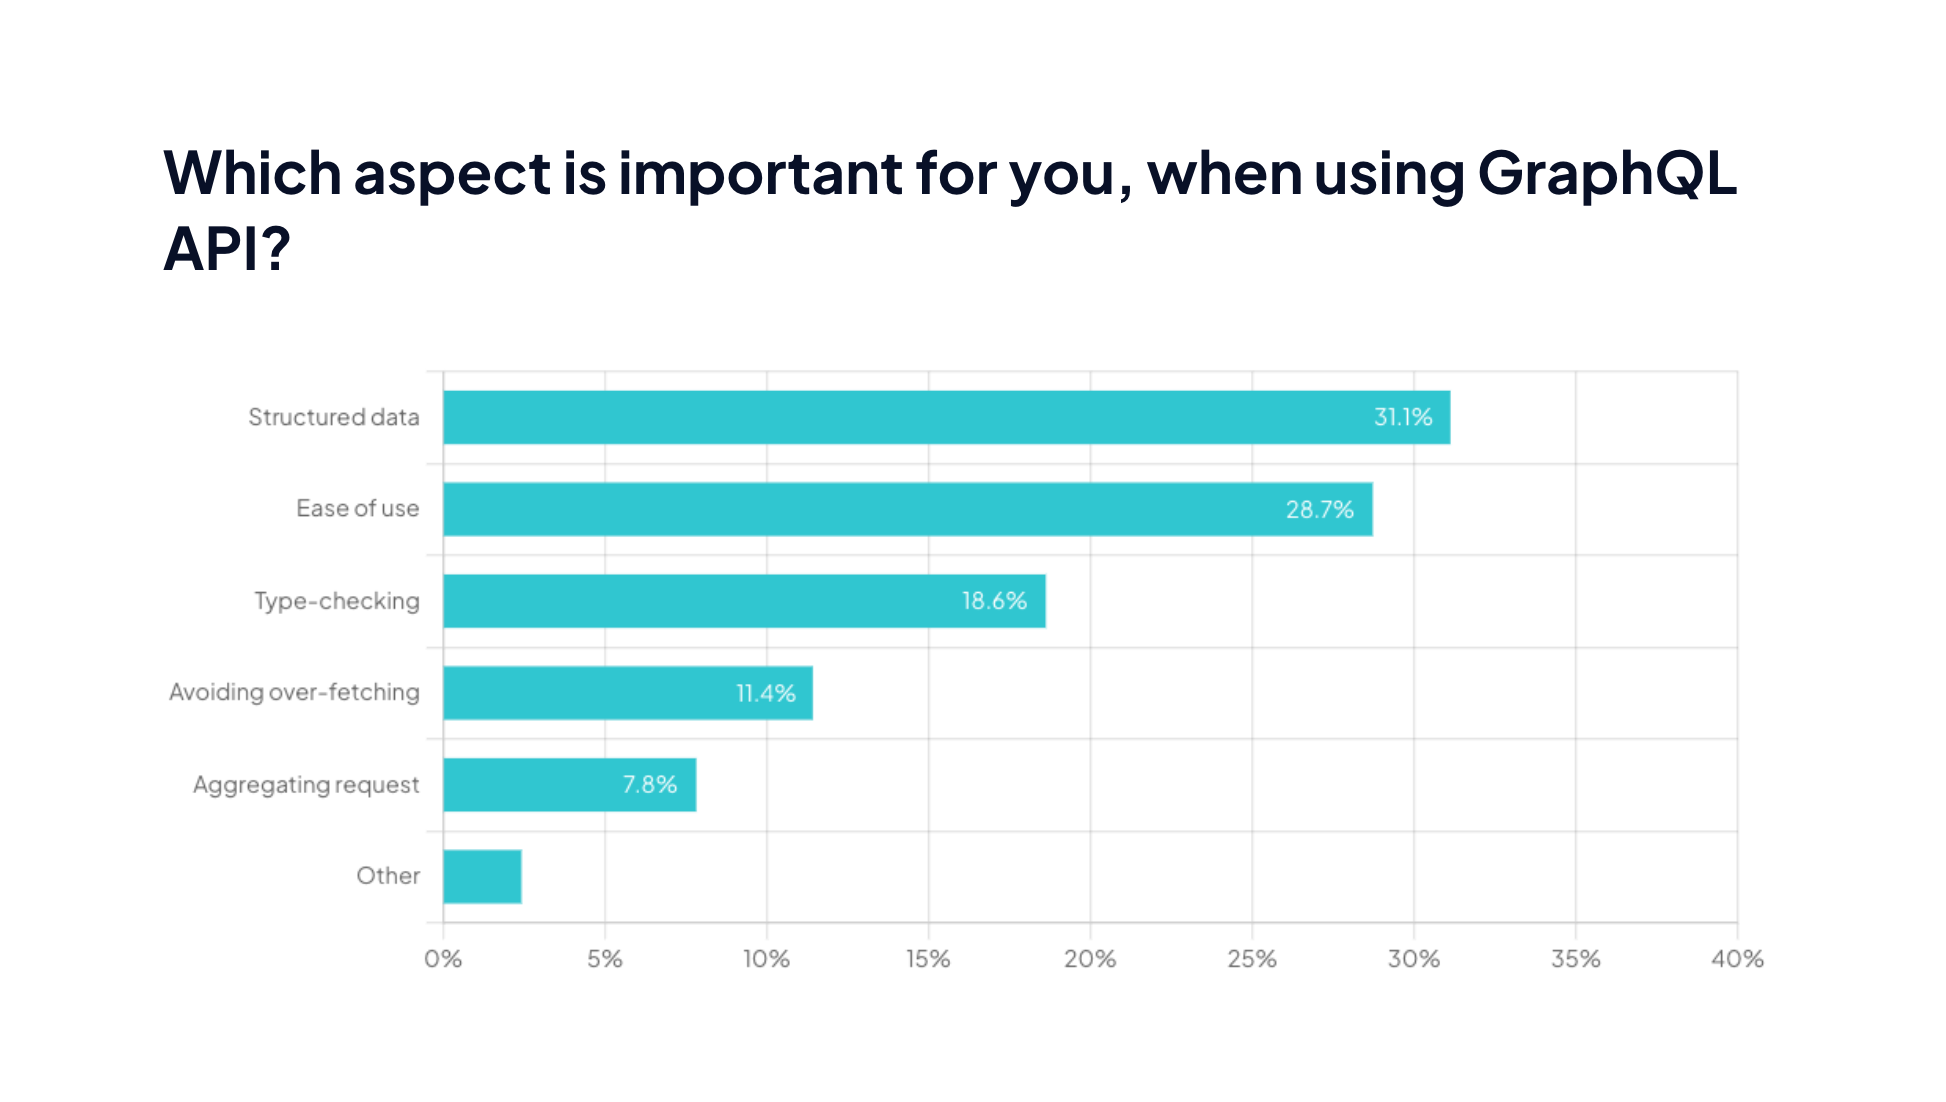 Which aspect is important for developers when using GraphQL API